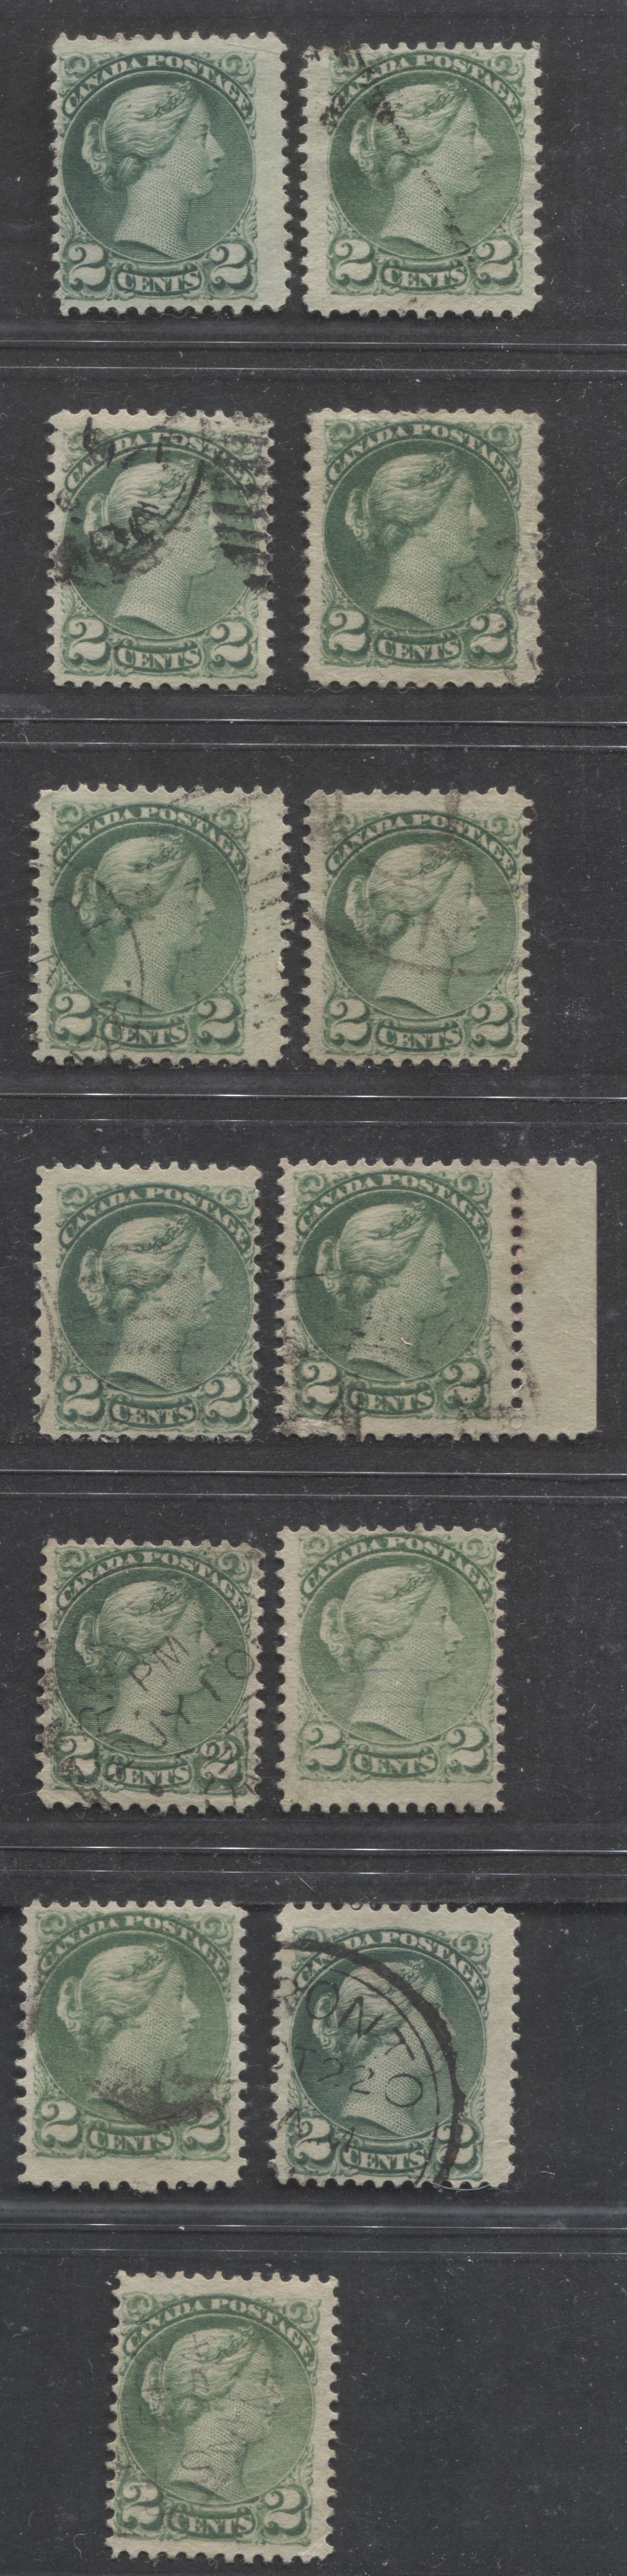 Lot 209 Canada #36i, 36ii 2c Green & Blue Green Queen Victoria, 1870-1897 Small Queen Issue, 13 Fine Used Singles, All Second Ottawa Printings, Soft, Opaque Poor Quality Wove, Various Shades